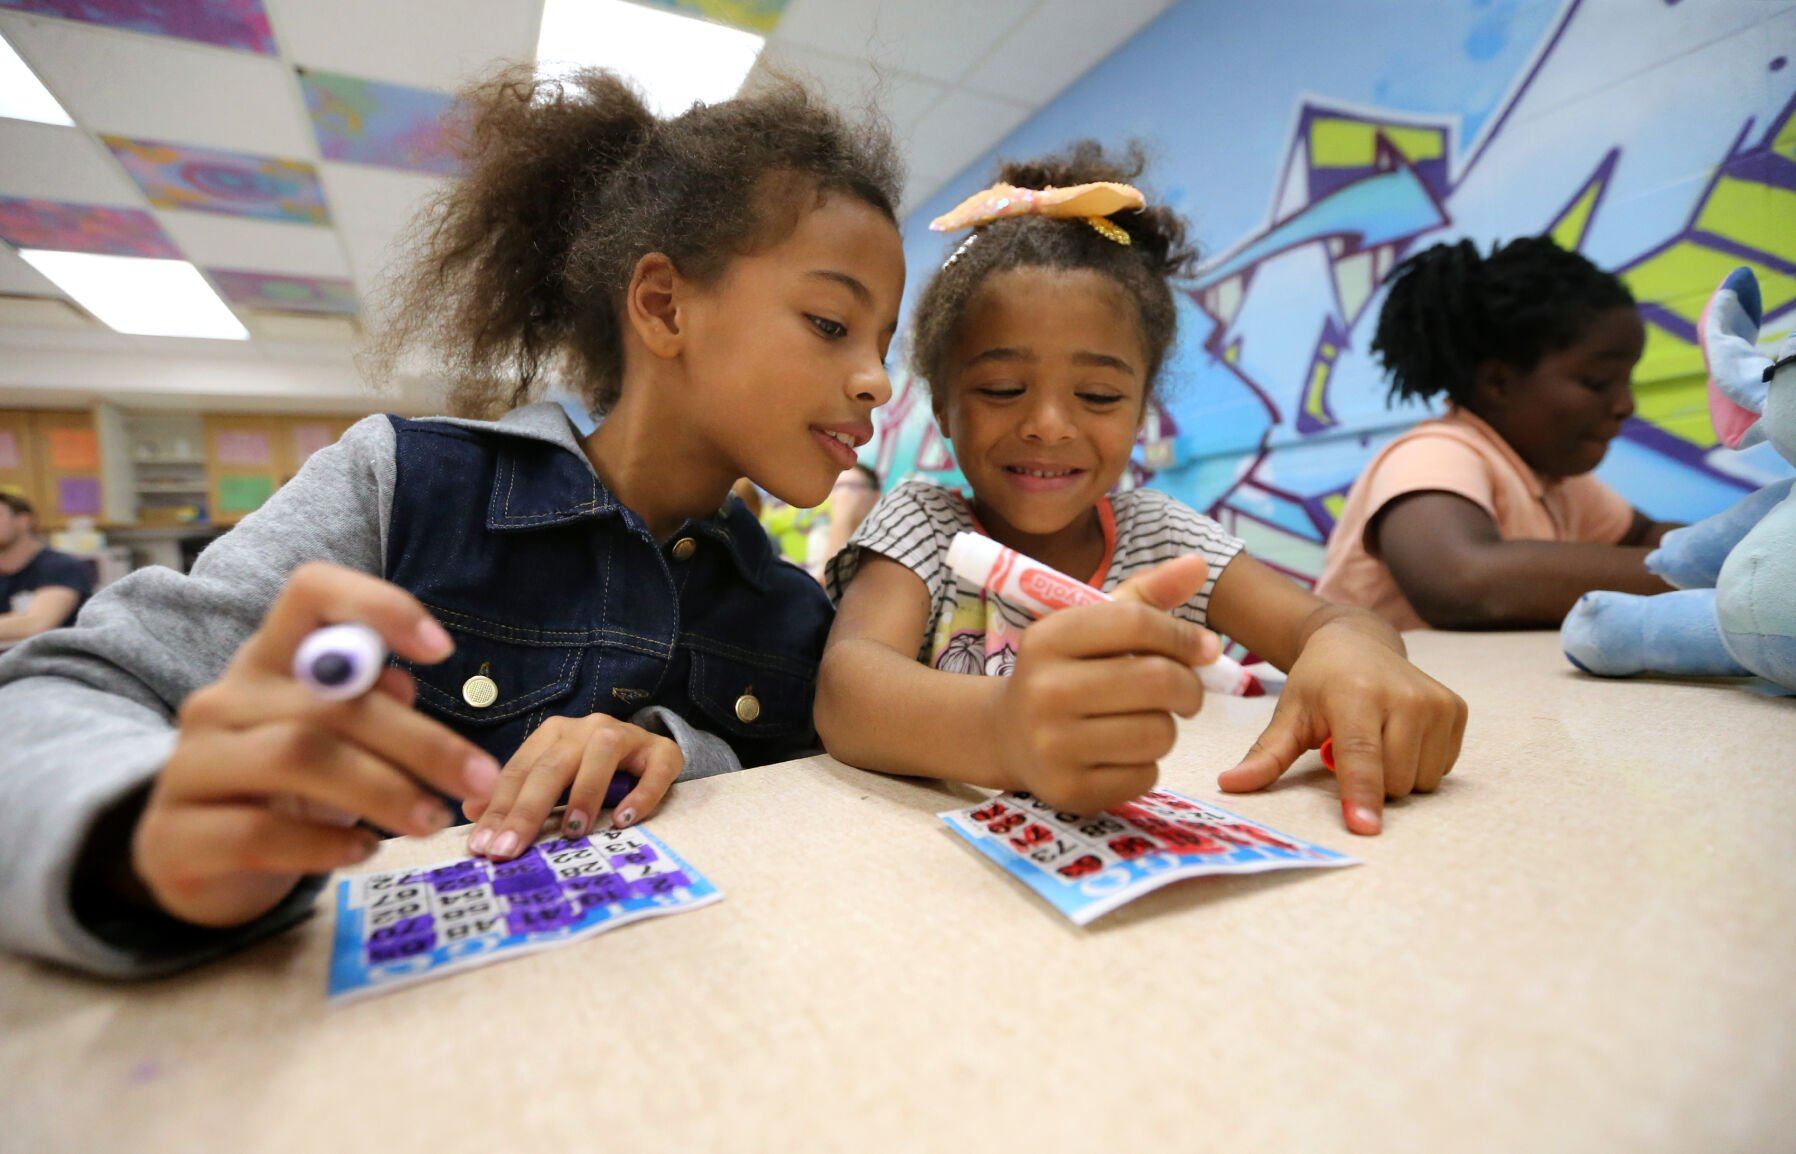 Lenora Mack (left), 7, and Ja’Kenzie Snipe, 6, play bingo at the Boys and Girls Club of Greater Dubuque on Monday.    PHOTO CREDIT: JESSICA REILLY